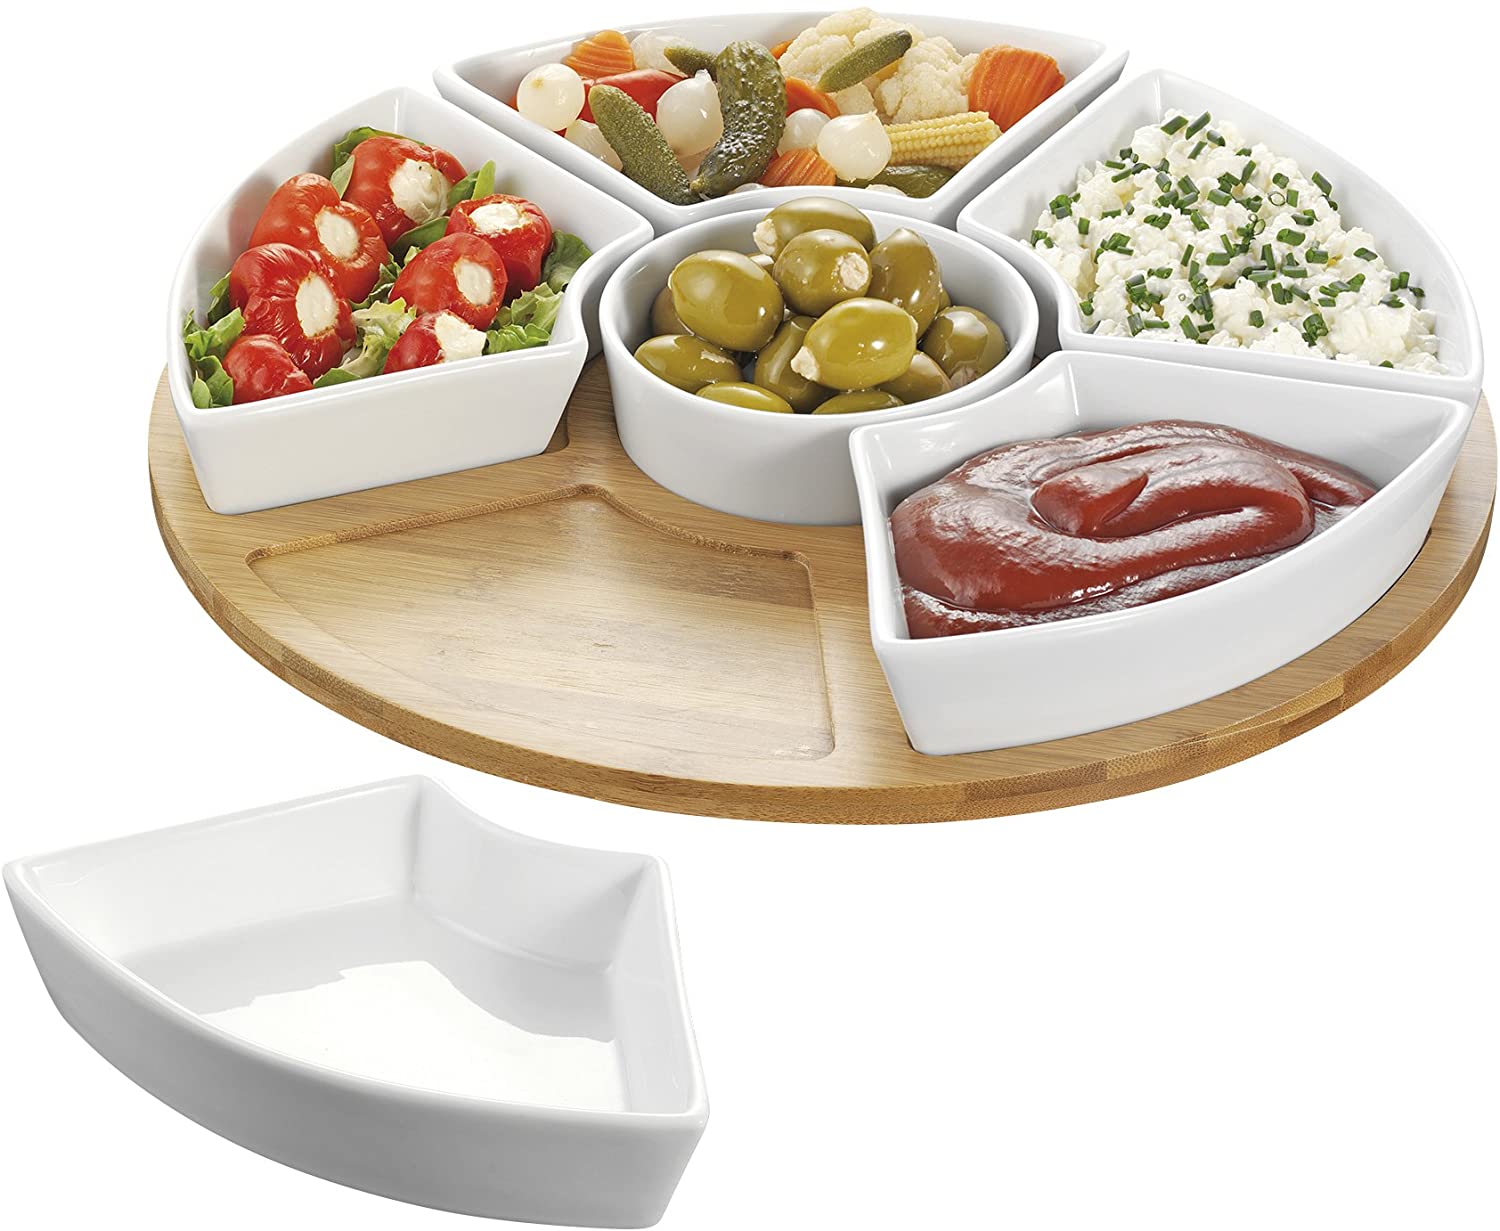 Esmeyer Caterado SUSAN rotating serving tray with 6 white porcelain bowls and a bamboo tray